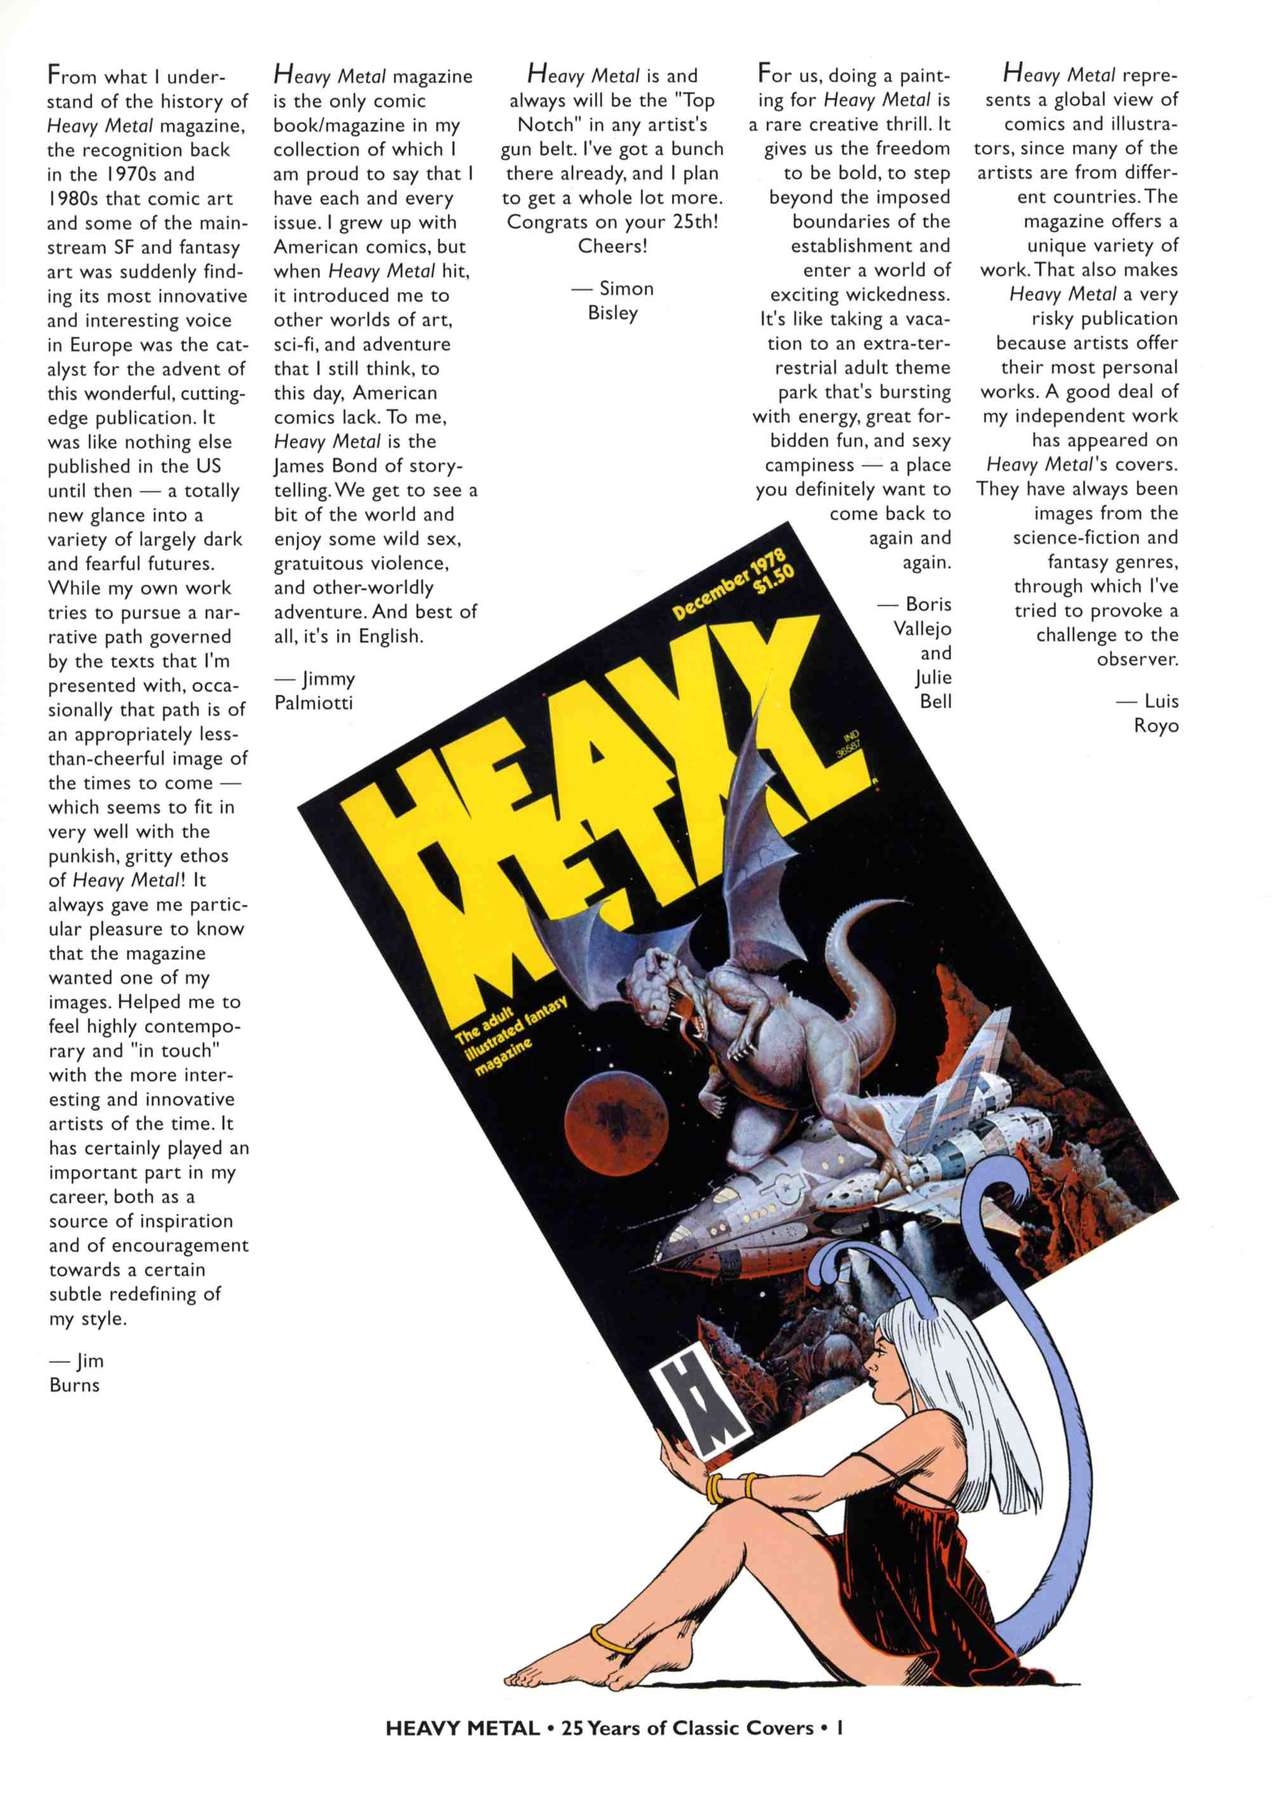 HEAVY METAL 25 Years of Classic Covers 6